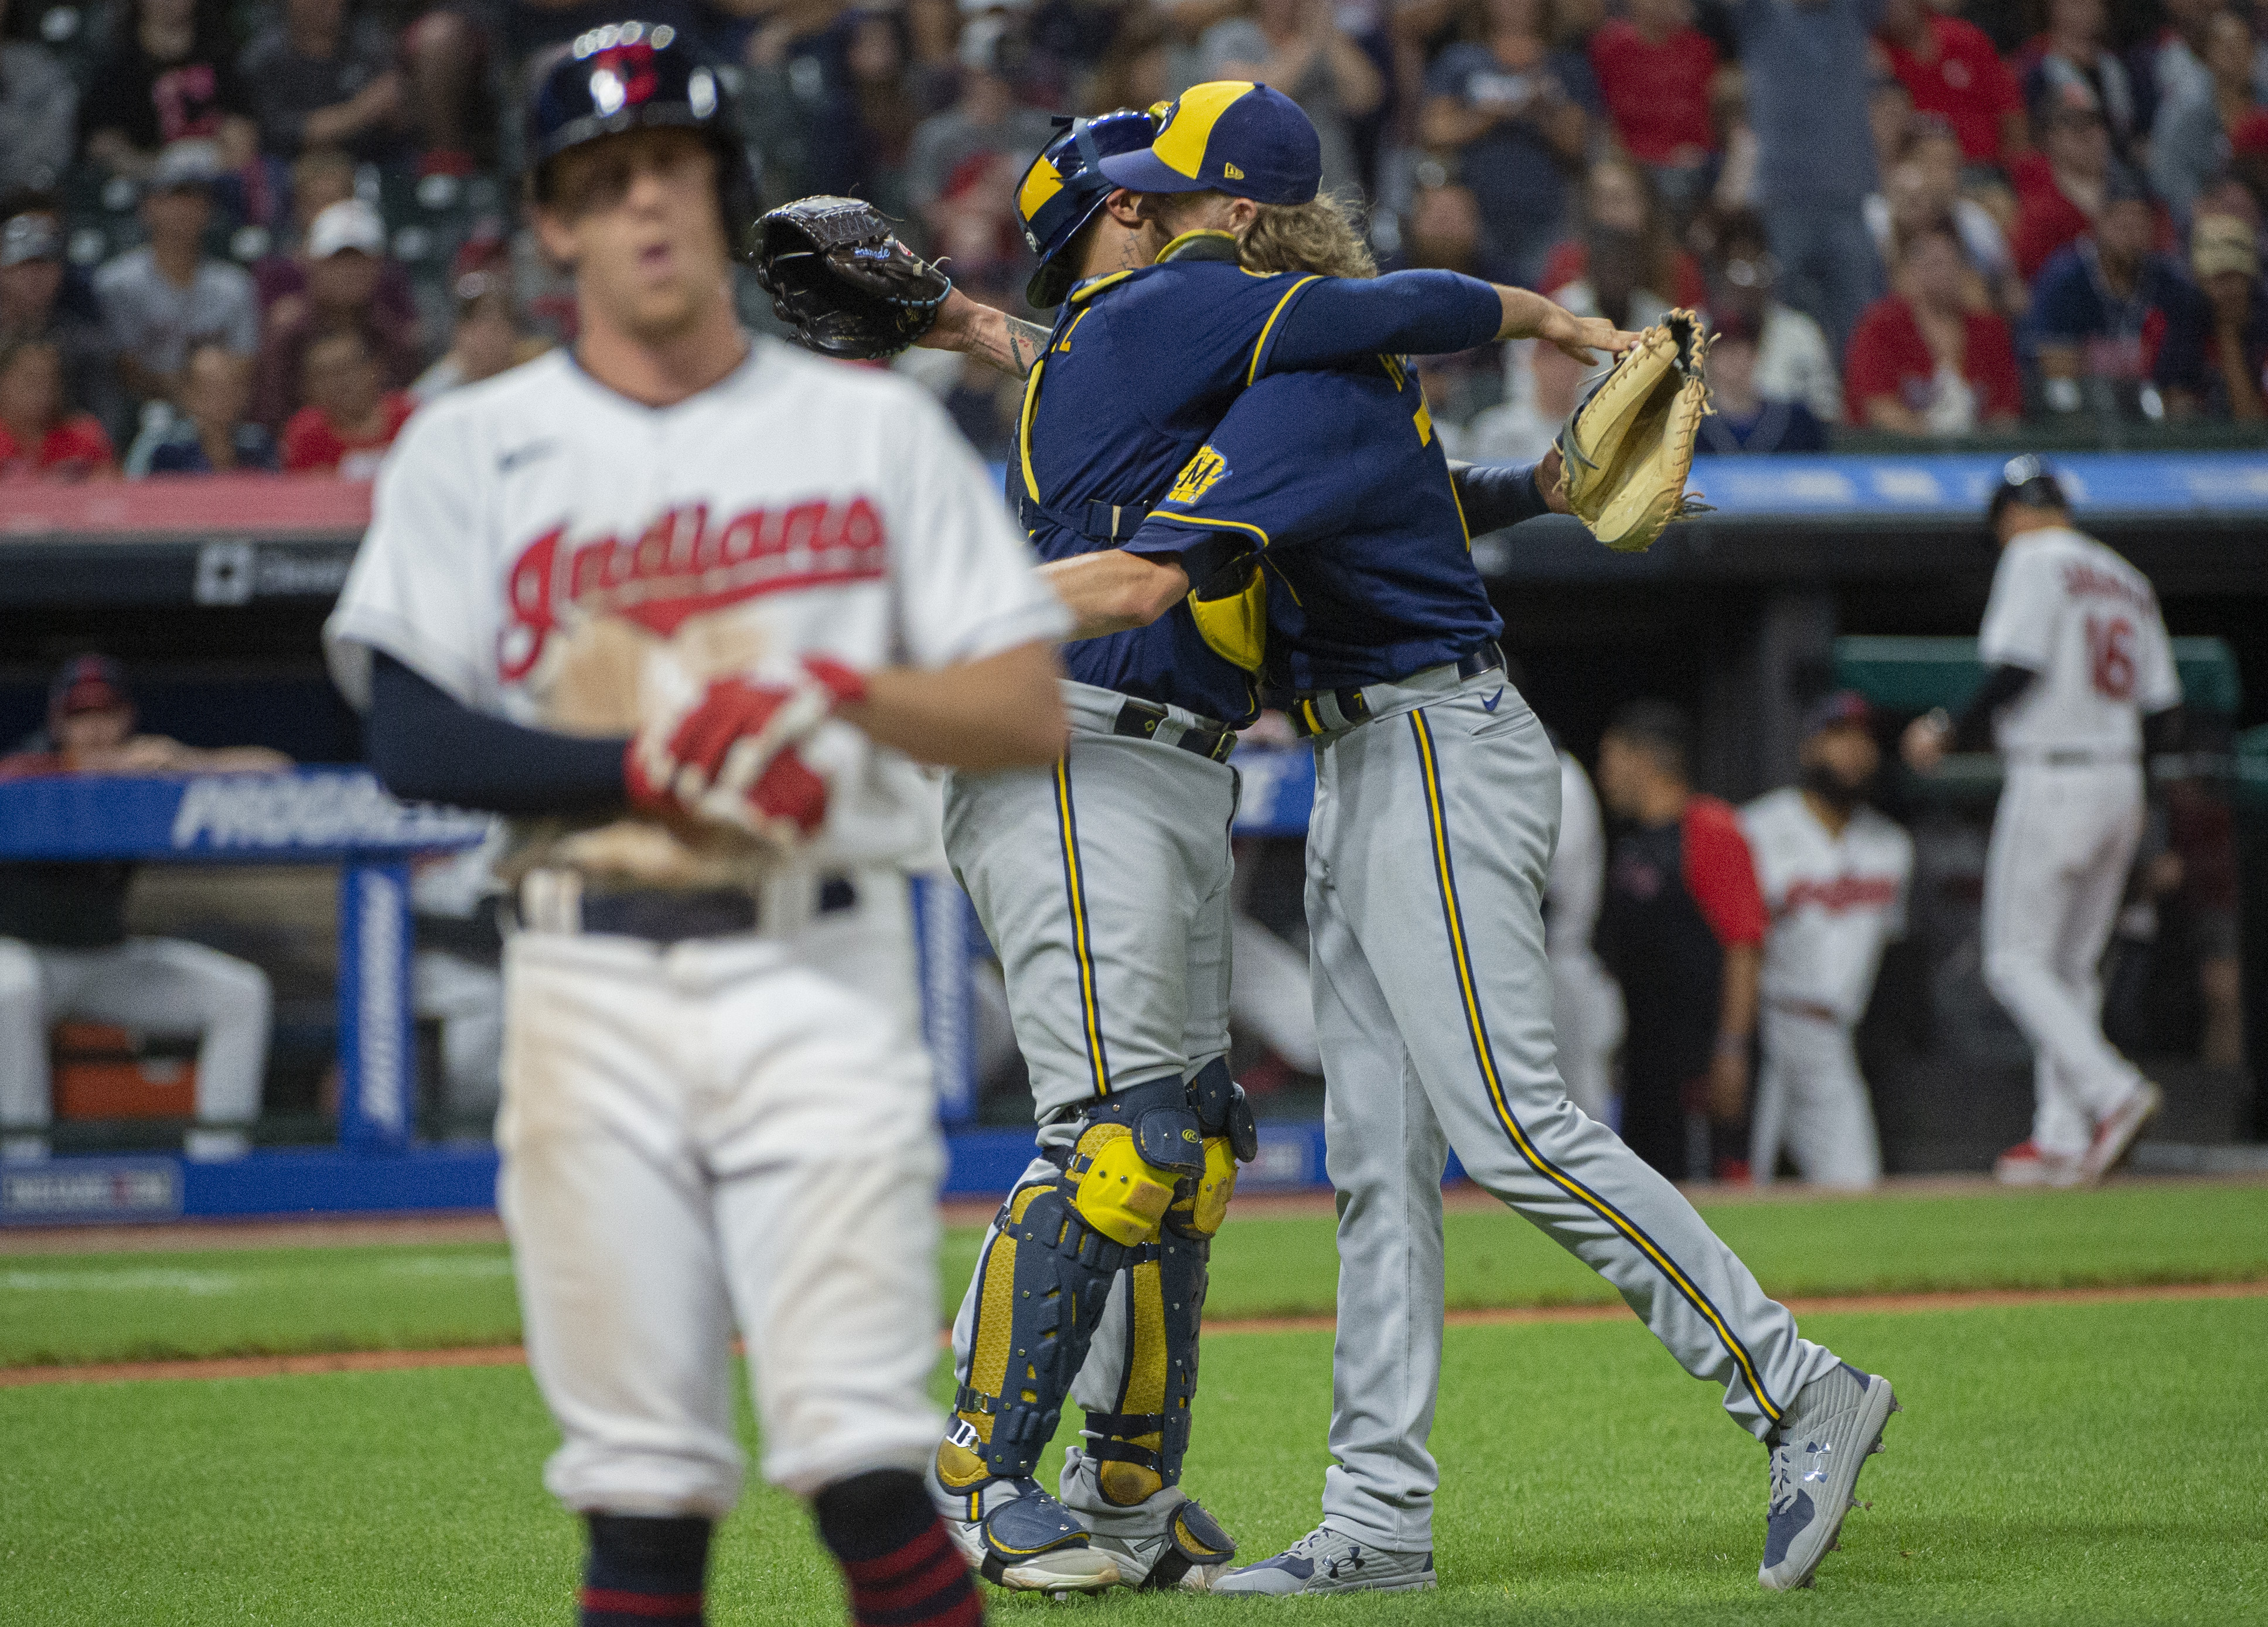 Corbin Burnes dominates in game one of doublehader, Brewers